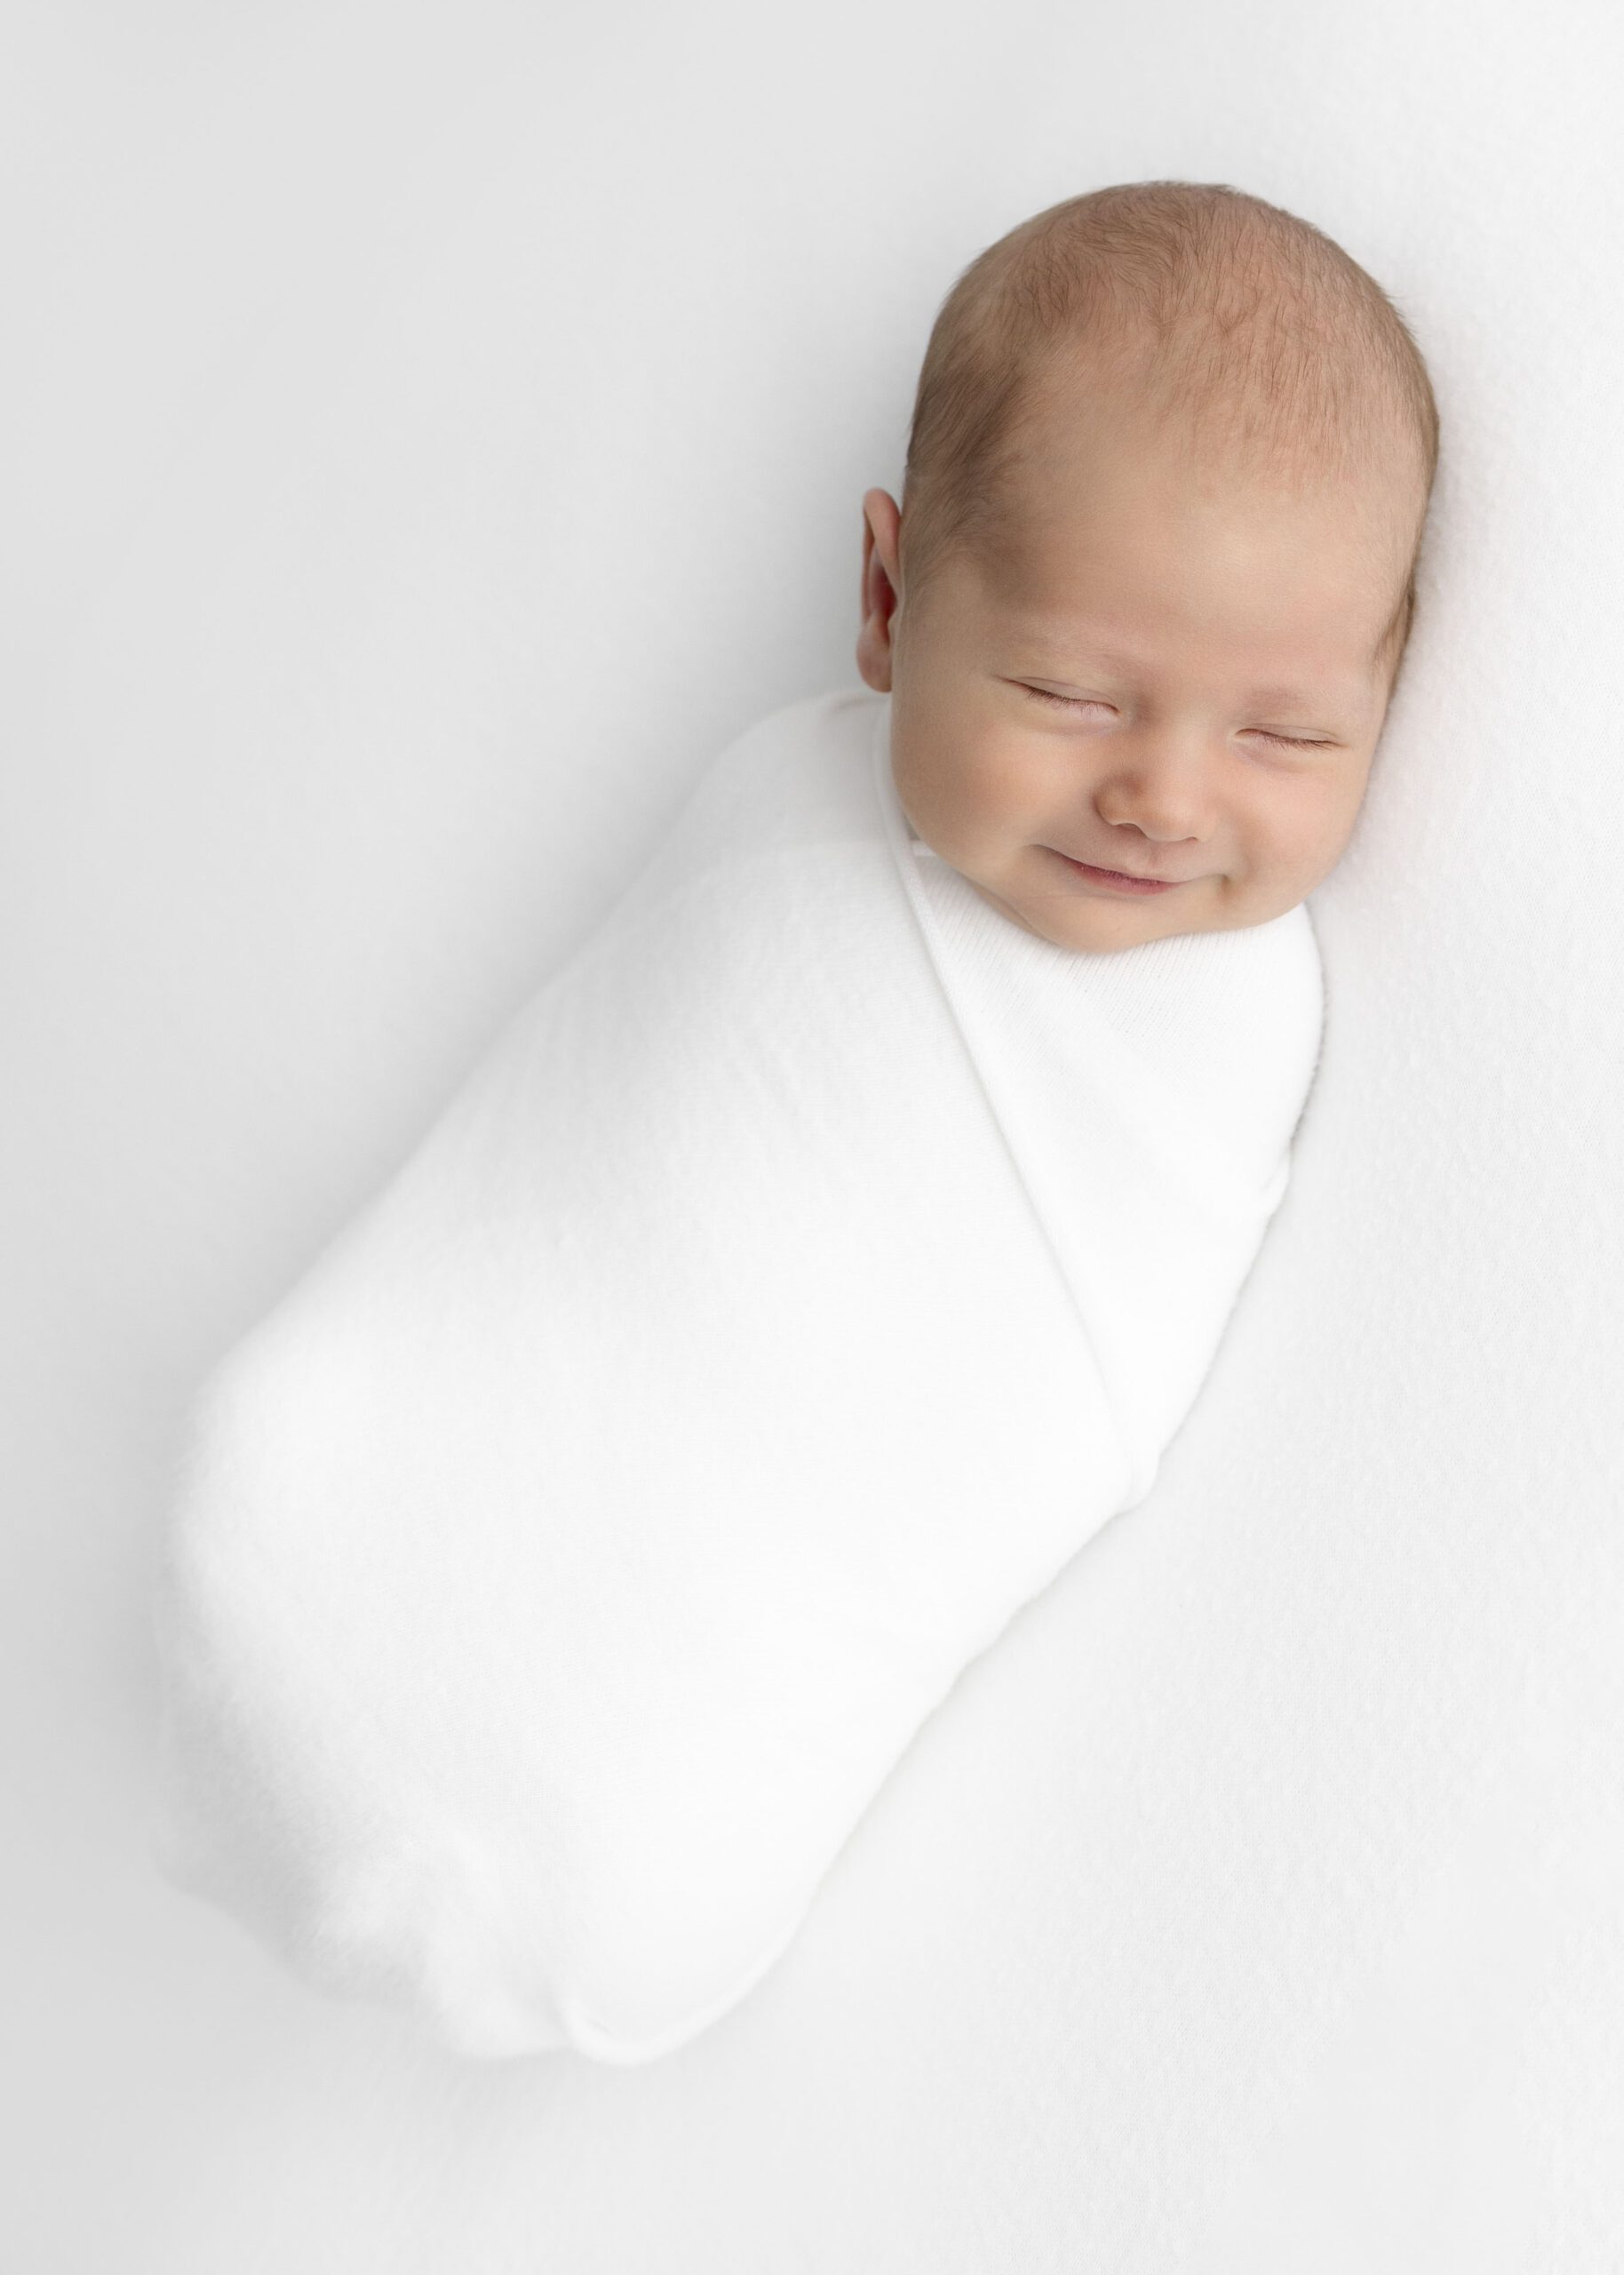 newborn baby swaddled and smiling at the camera